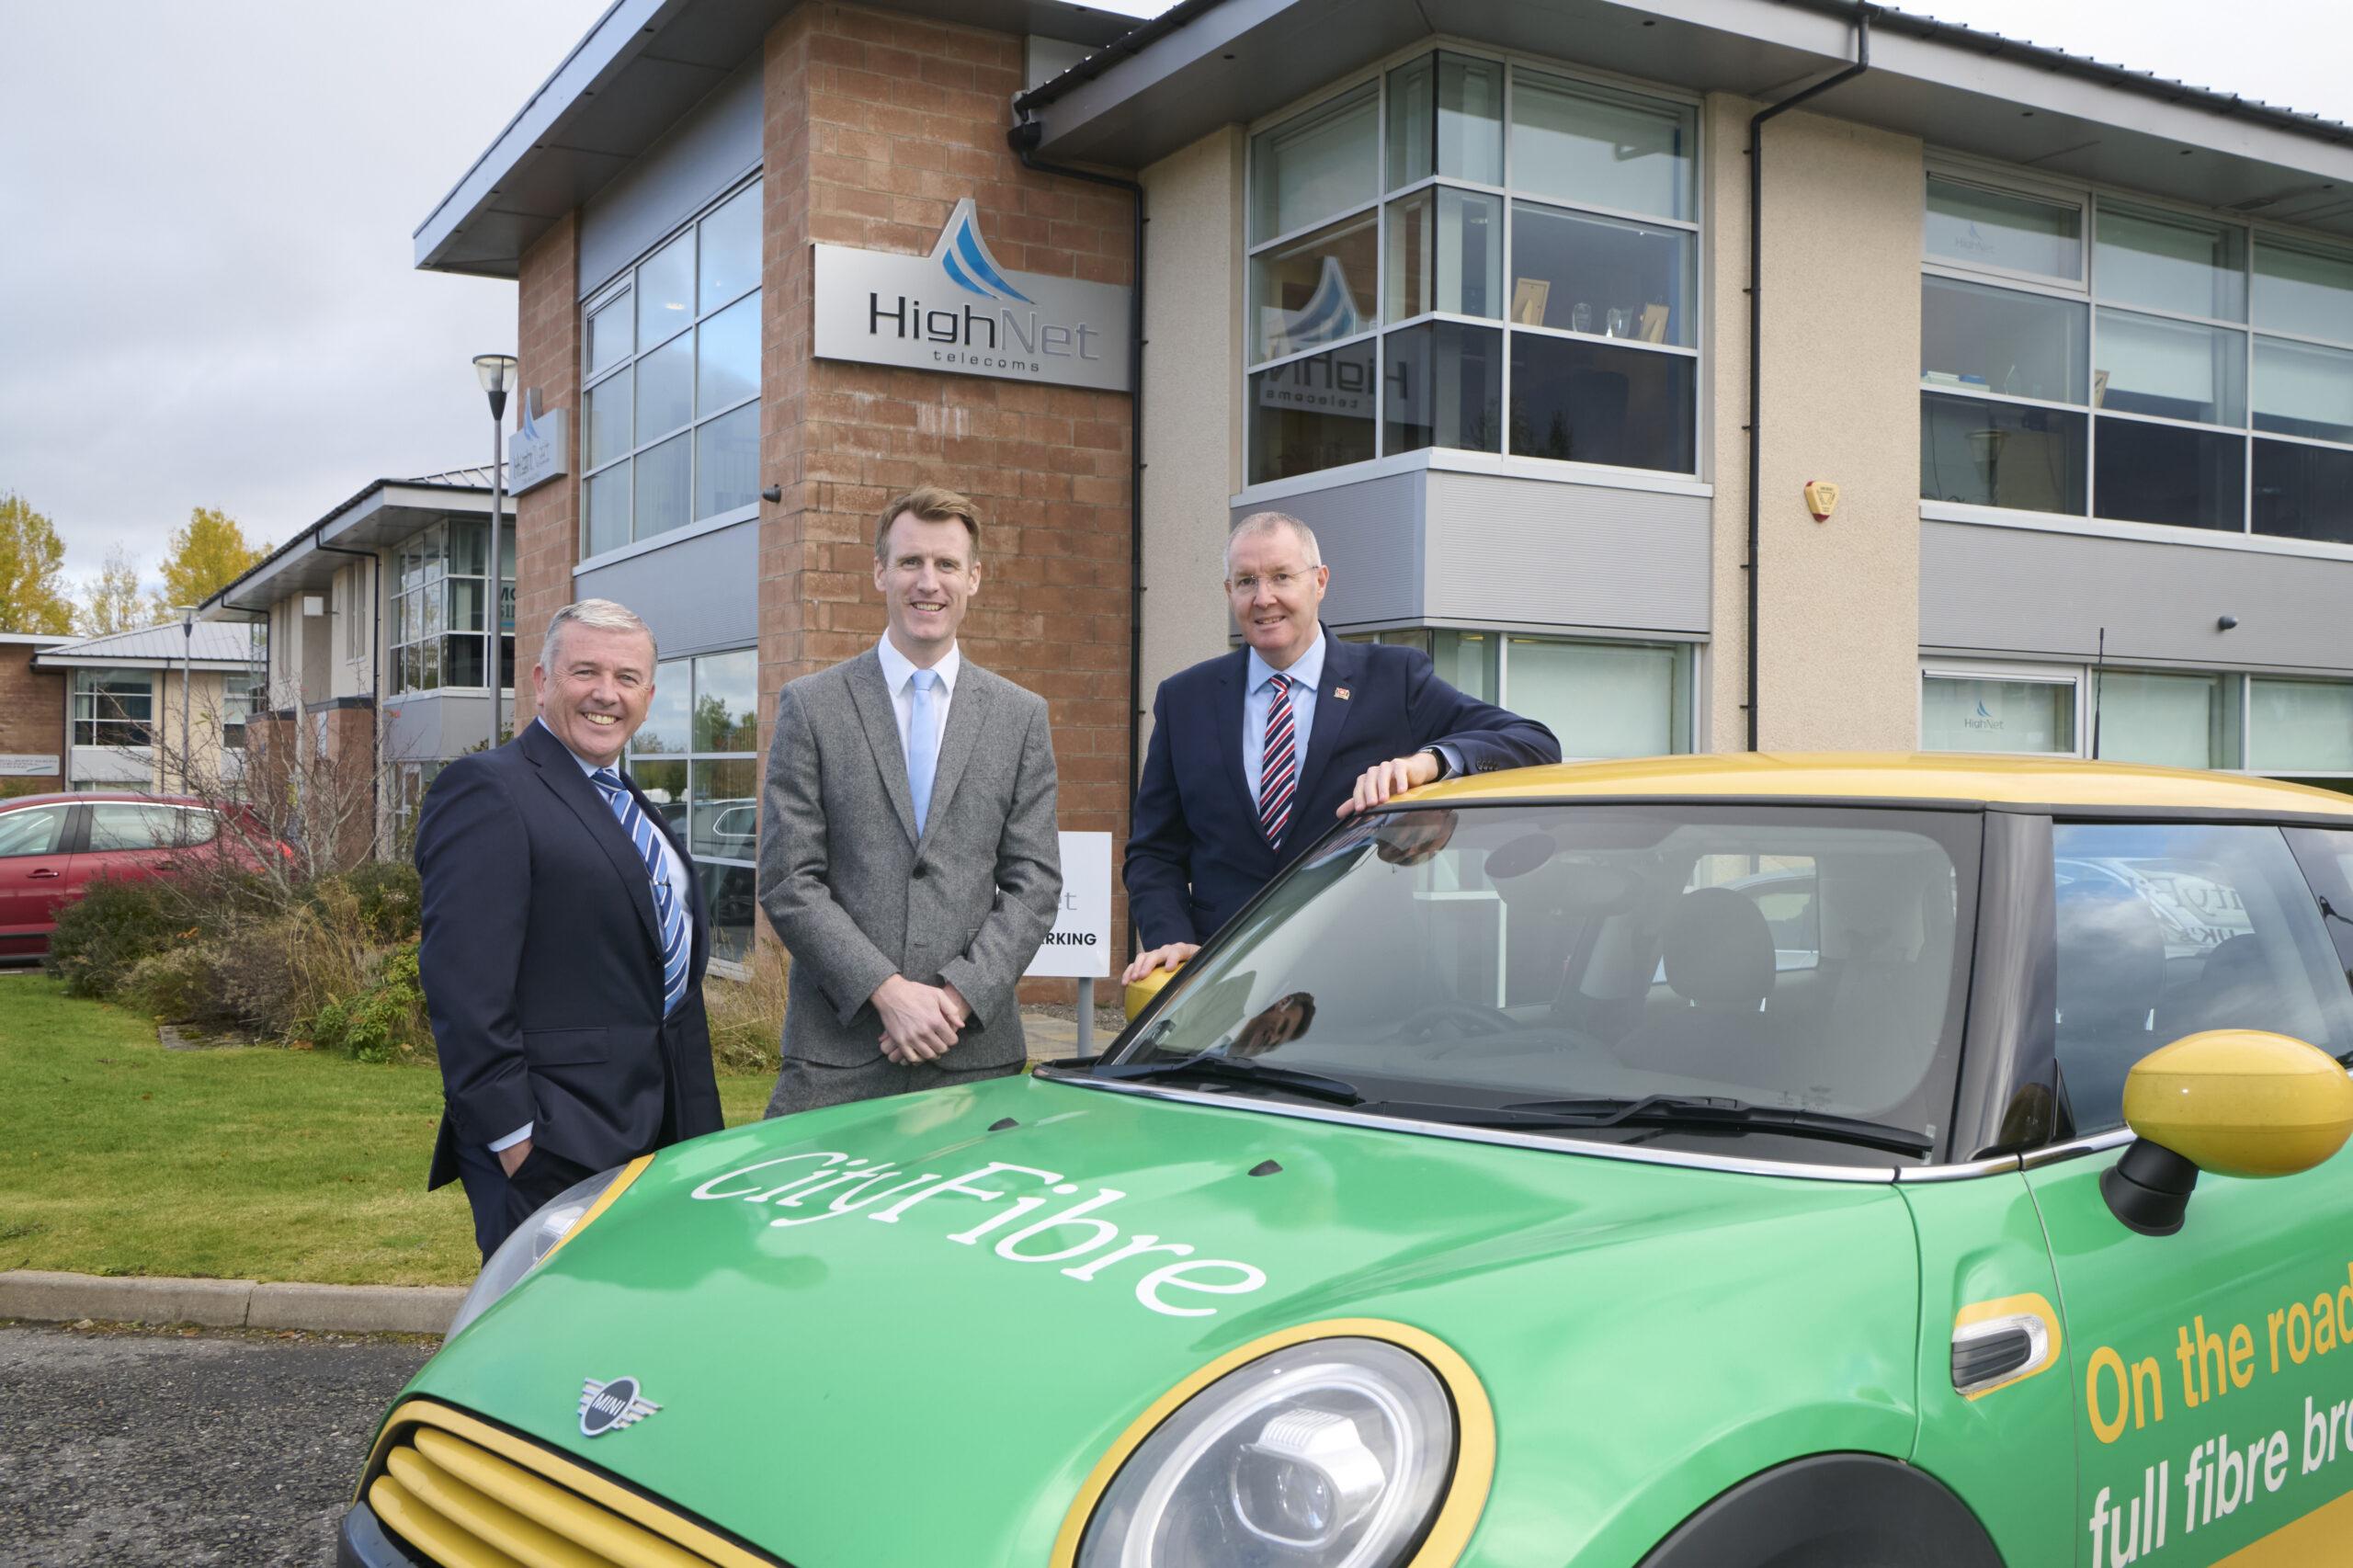 left to right: David Siegel, Managing Director at HighNet; Allan McEwan, CityFibre’s City Manager for Inverness; and Cllr Duncan MacPherson